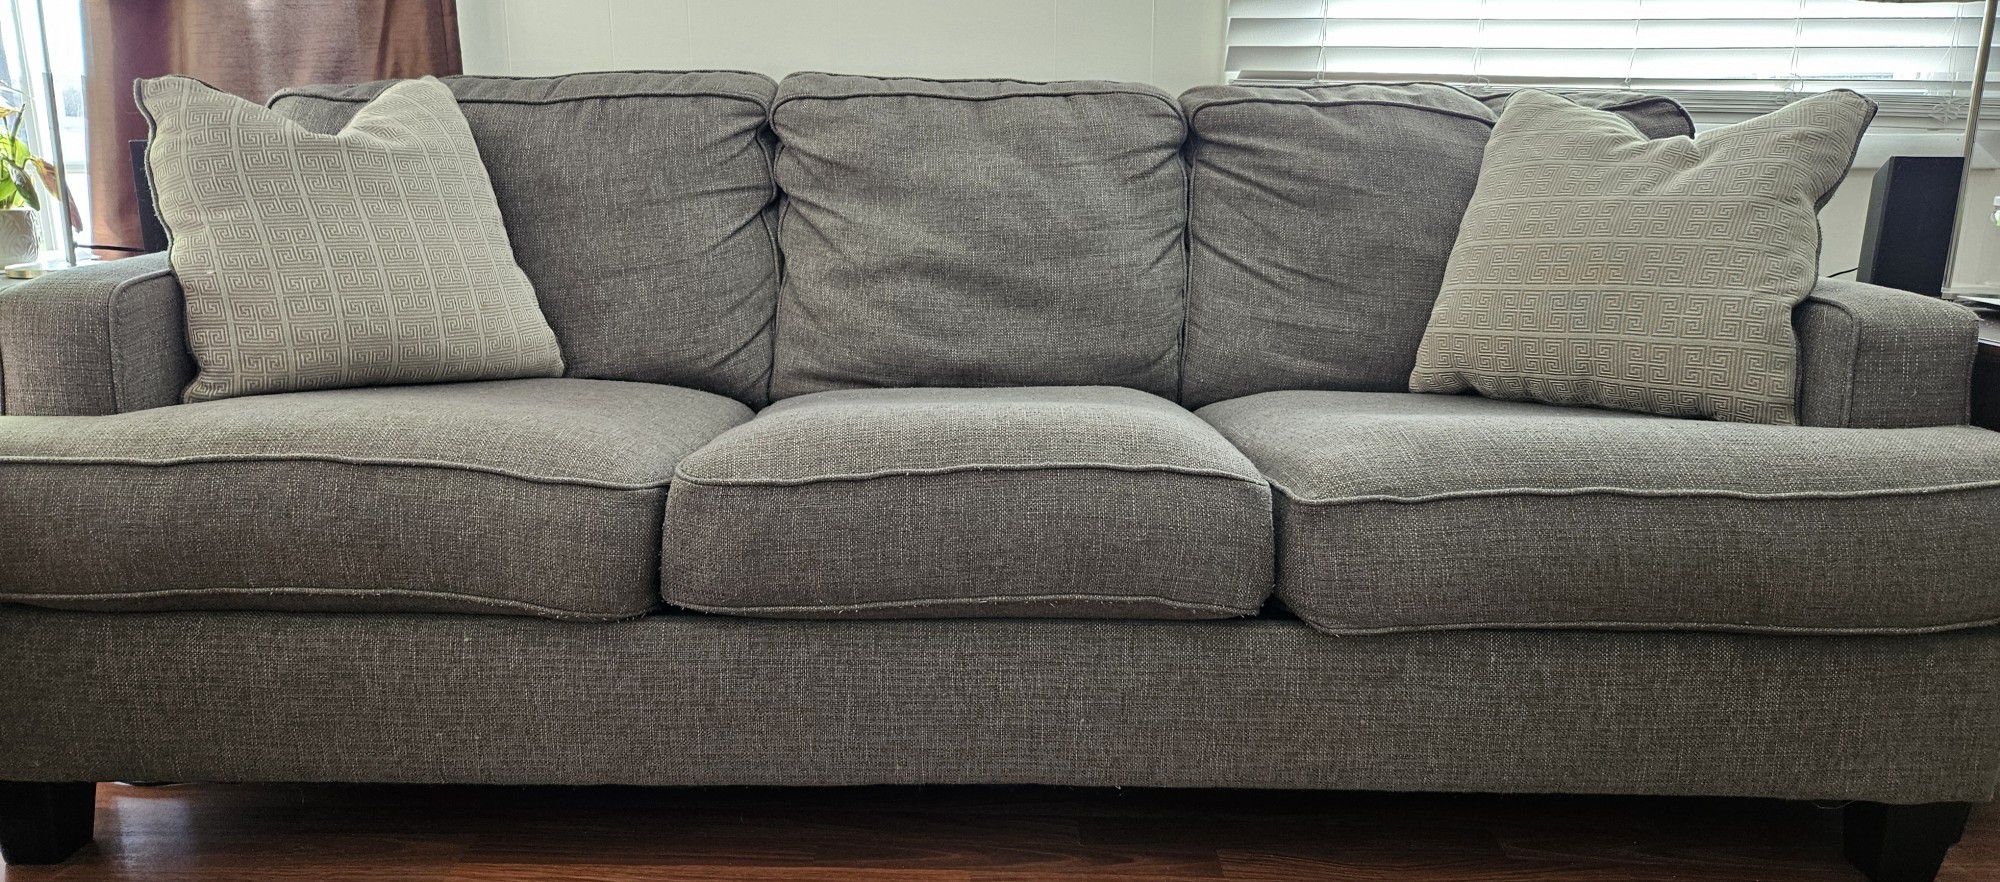 Medium Grey Couch And Throw Pillows